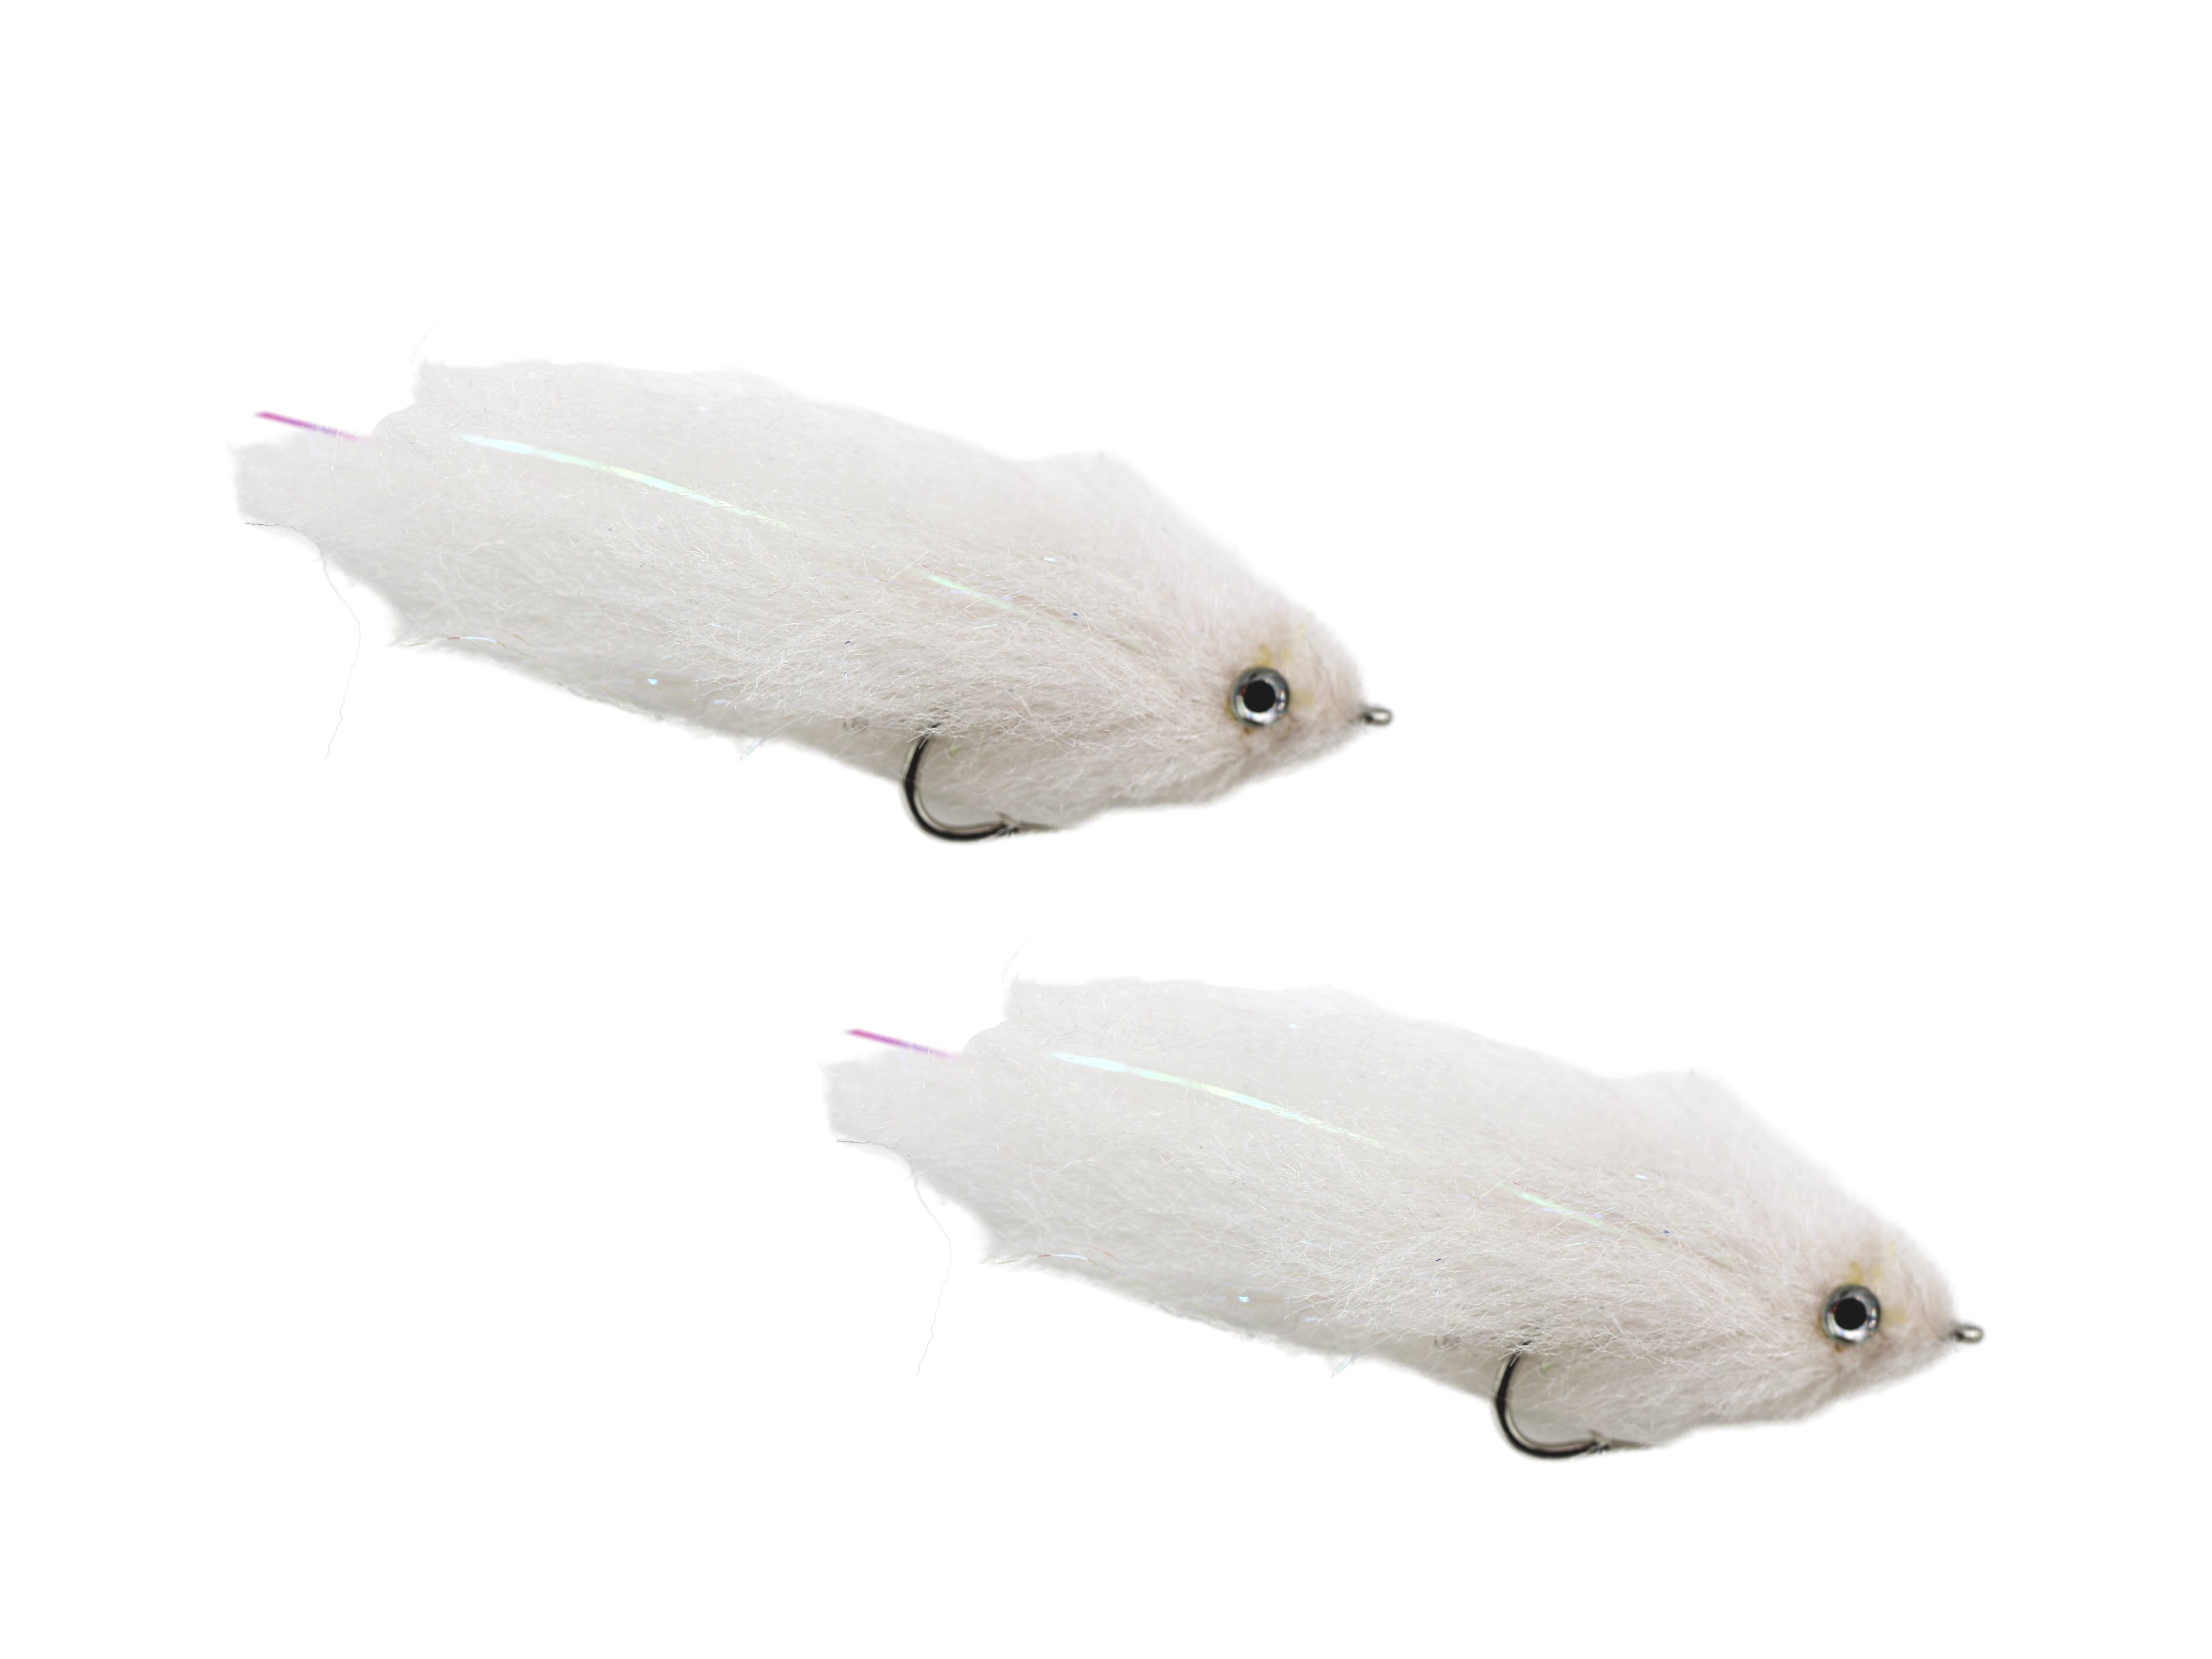 White EP Fly, size 2/0, Qty. 2